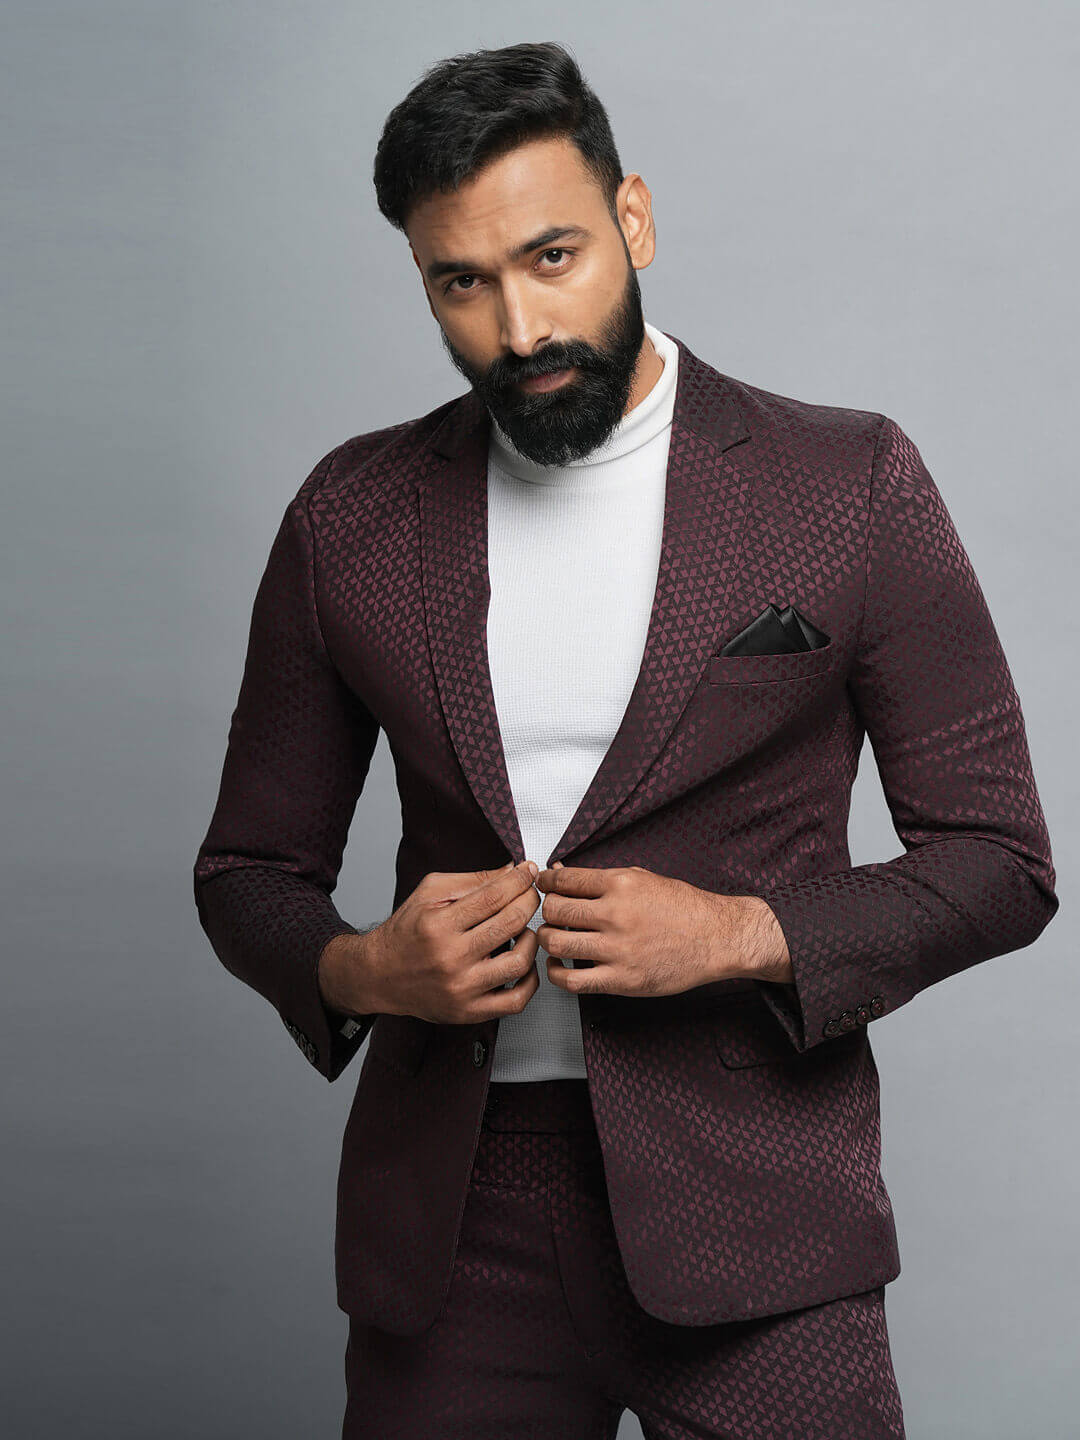 Rent/Buy Maroon Diamond Print Suit | Home Trial | Free Delivery | CandidMen